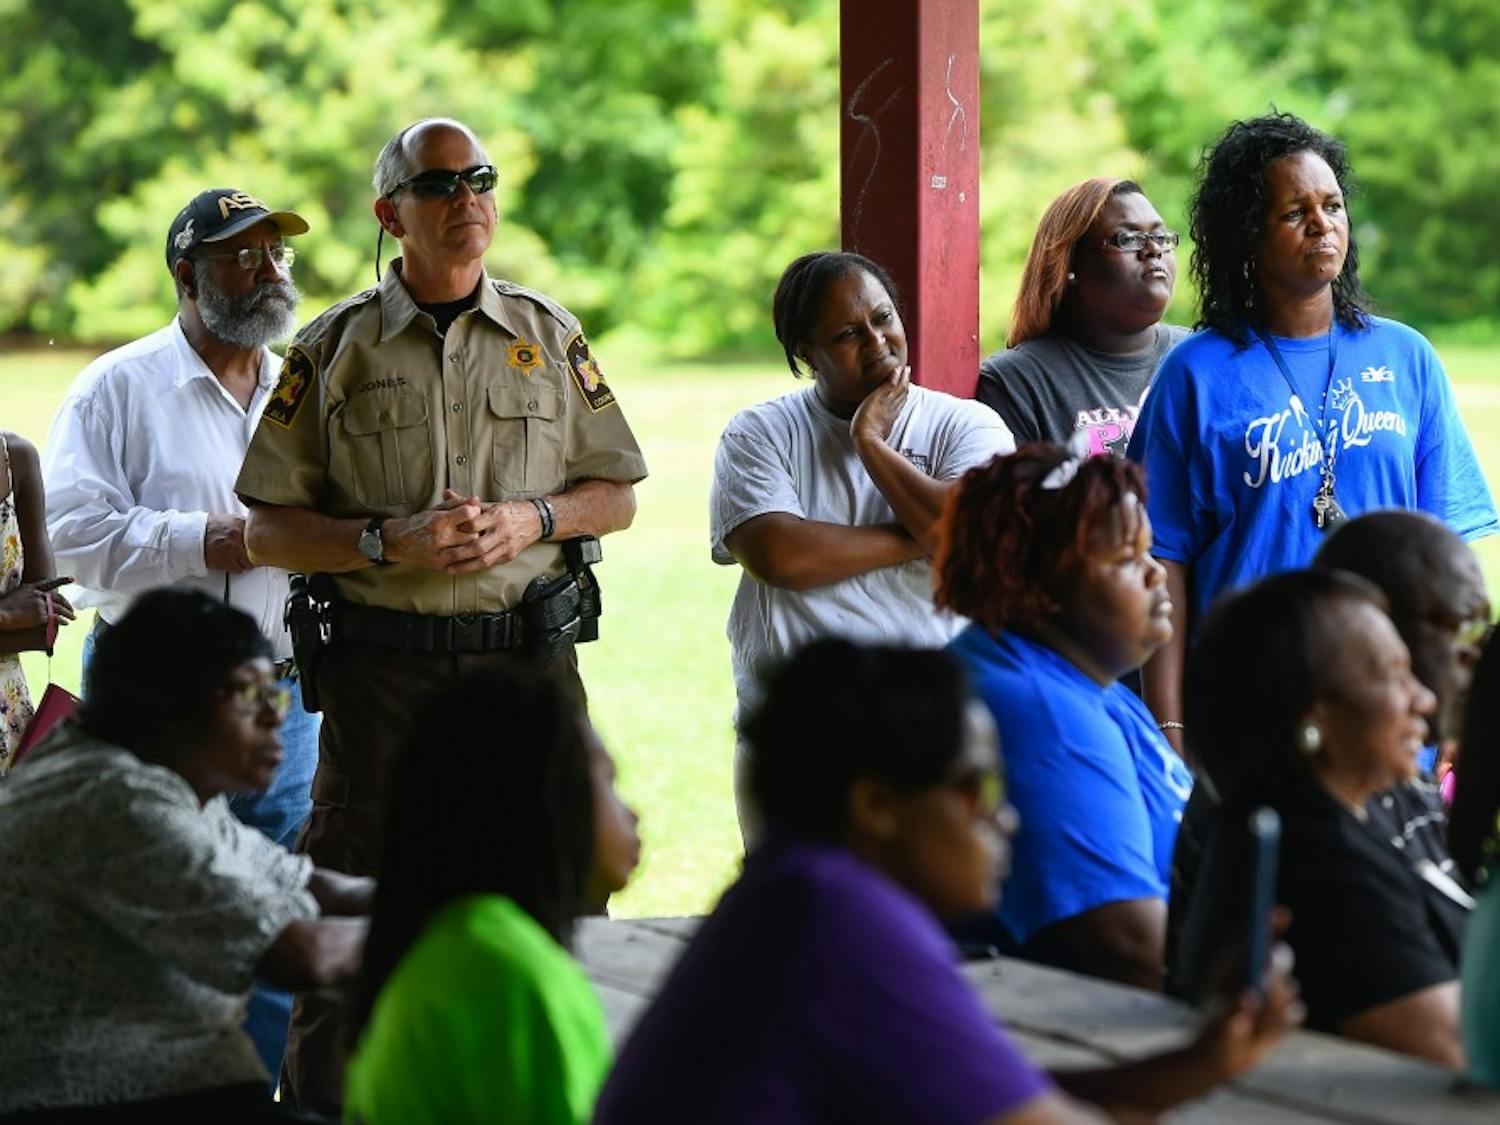 Auburn residents gather with Lee county sheriff Jay Jones&nbsp;during a separate&nbsp;Stop the Violence rally at Sam Harris Park on Sat. April 30, 2016 in Auburn, Ala. Opelika community members gathered earlier in June.